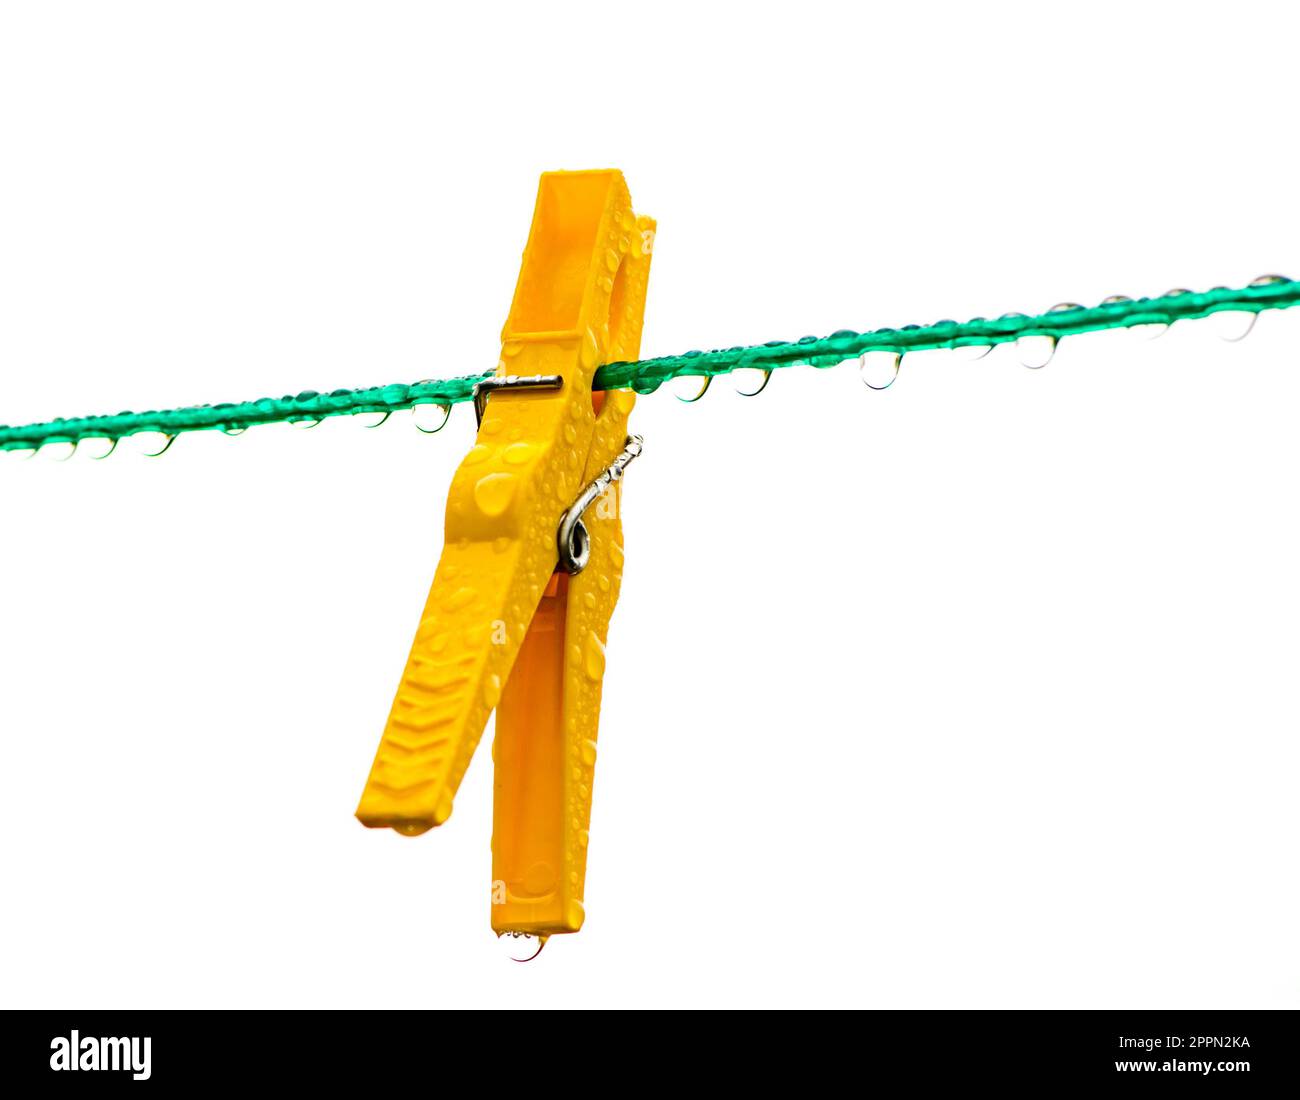 Wet yellow clothespin on a green washing line full of rain drops Stock Photo